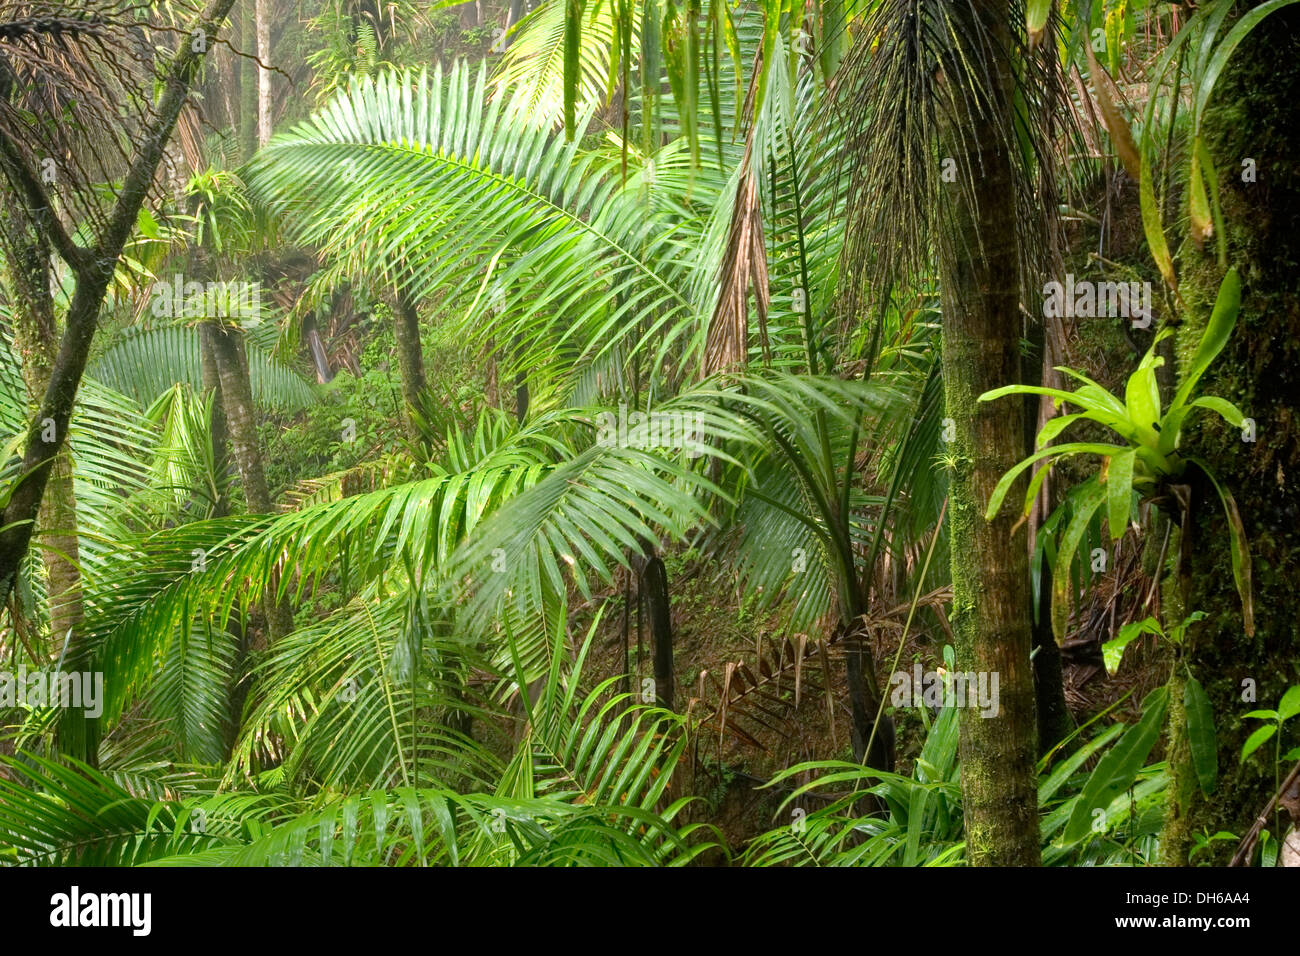 Palm trees in rain forest, El Yunque (Caribbean National Forest), Puerto Rico Stock Photo